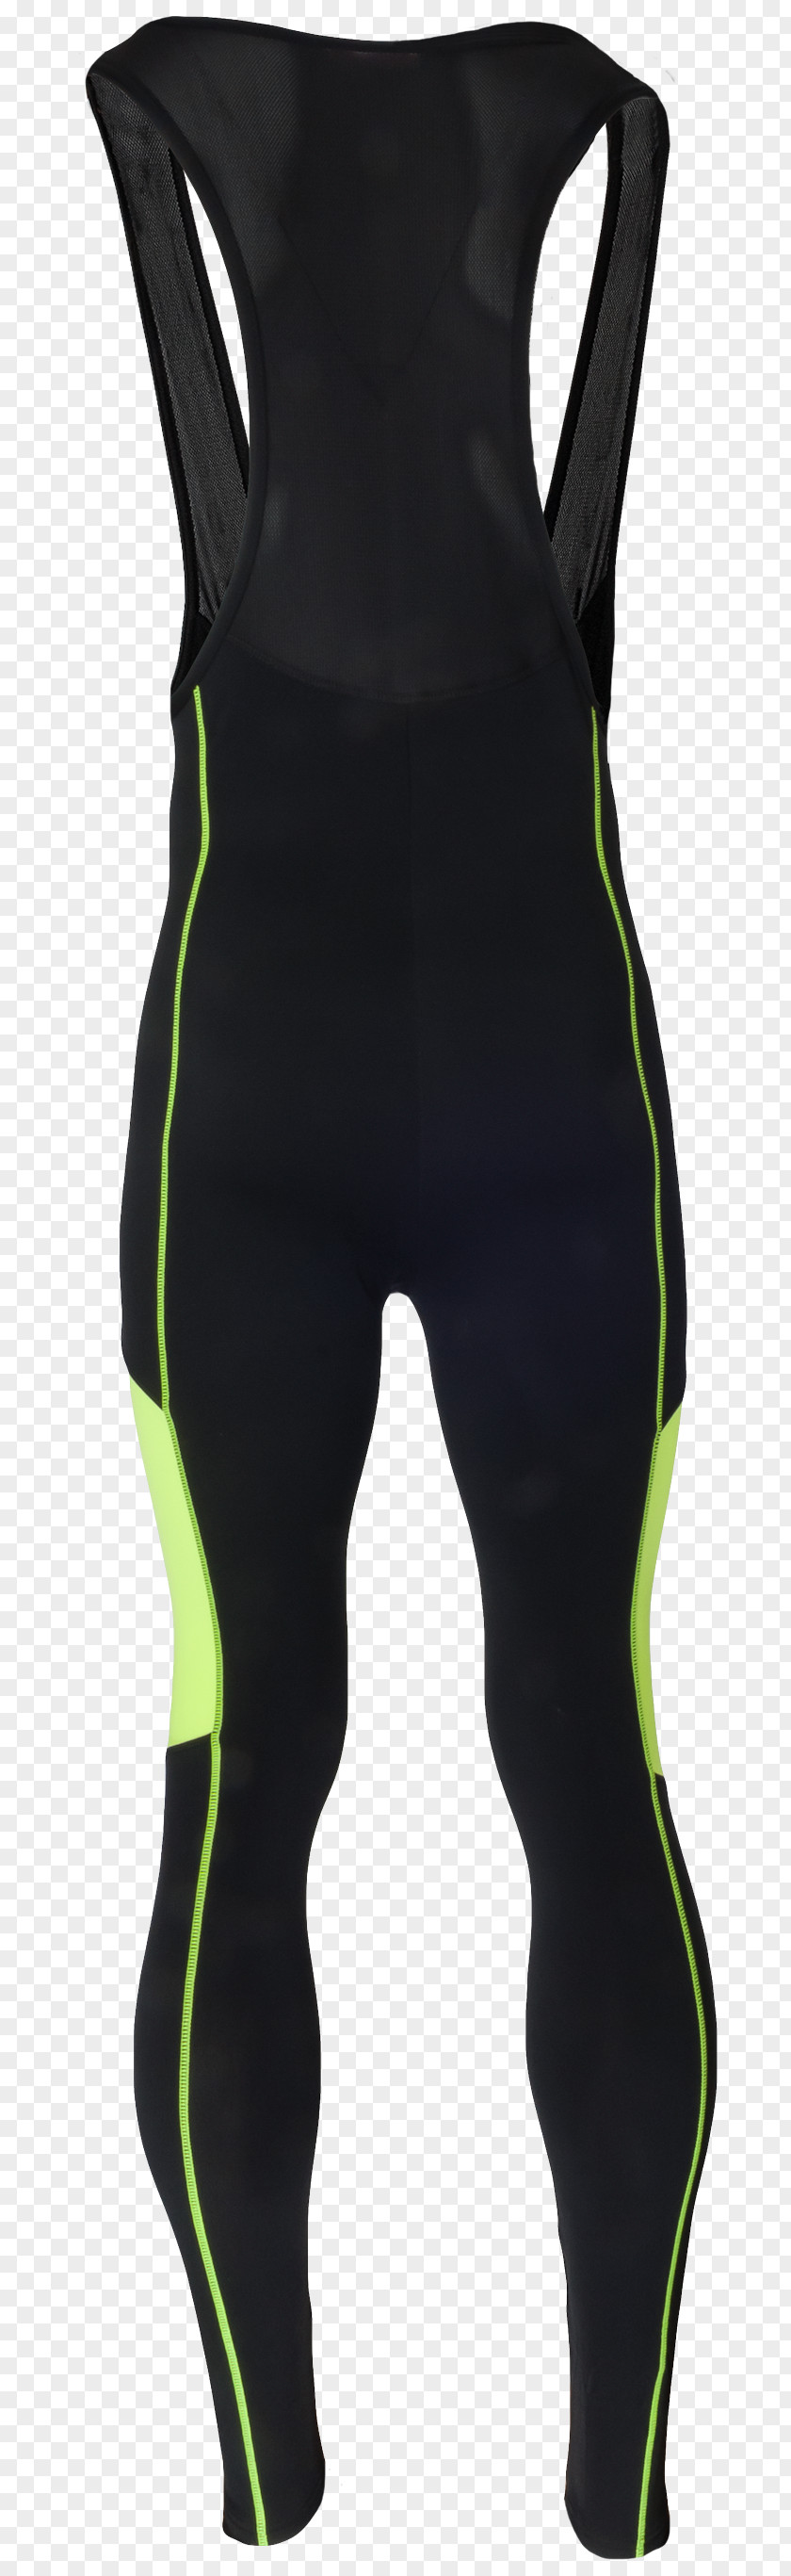 Child Sport Sea Wetsuit PNG